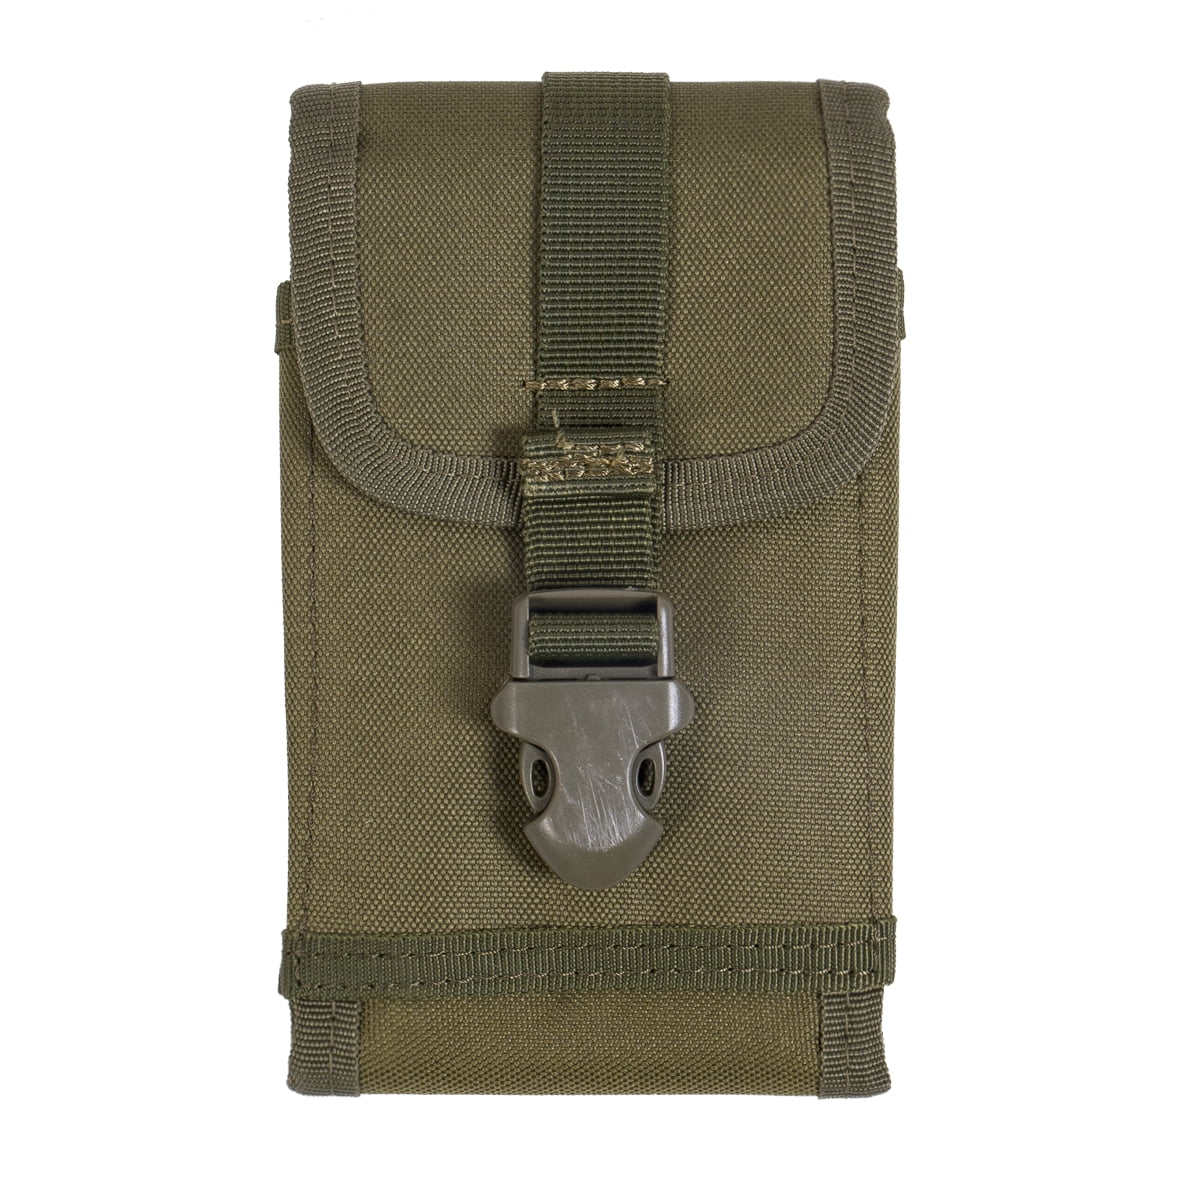 5.5" Tactical Military Molle Cellphone Pouch Case Bag for iPhone6 Plus 5s 5C A 